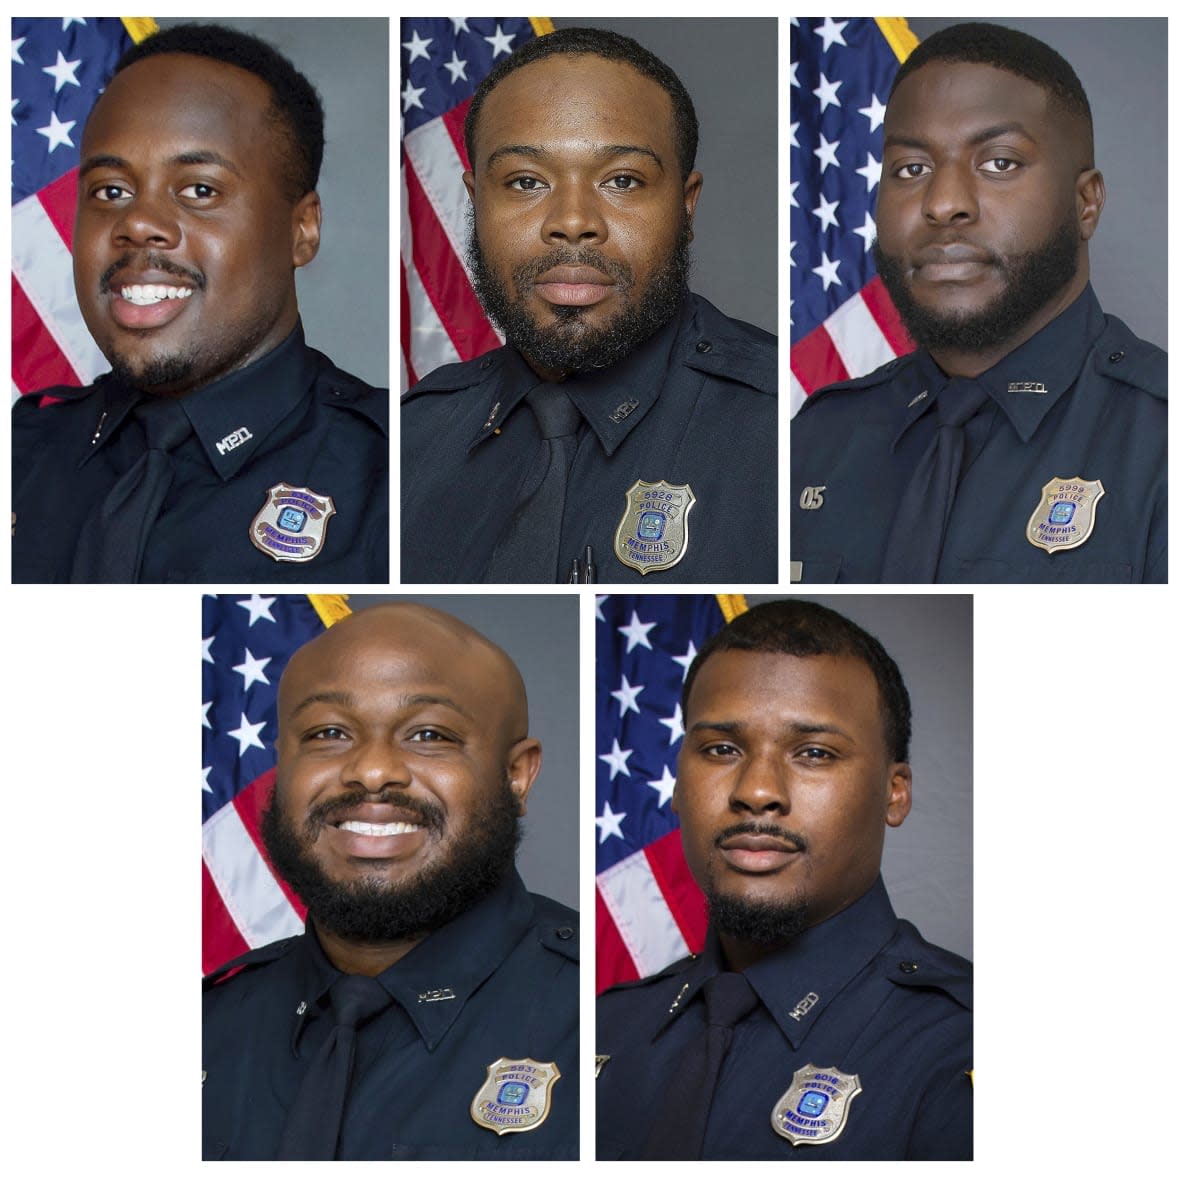 This combo of images provided by the Memphis Police Department shows, from top row from left, officers Tadarrius Bean, Demetrius Haley, Emmitt Martin III, bottom row, from left, Desmond Mills, Jr. and Justin Smith. (Memphis Police Department via AP)